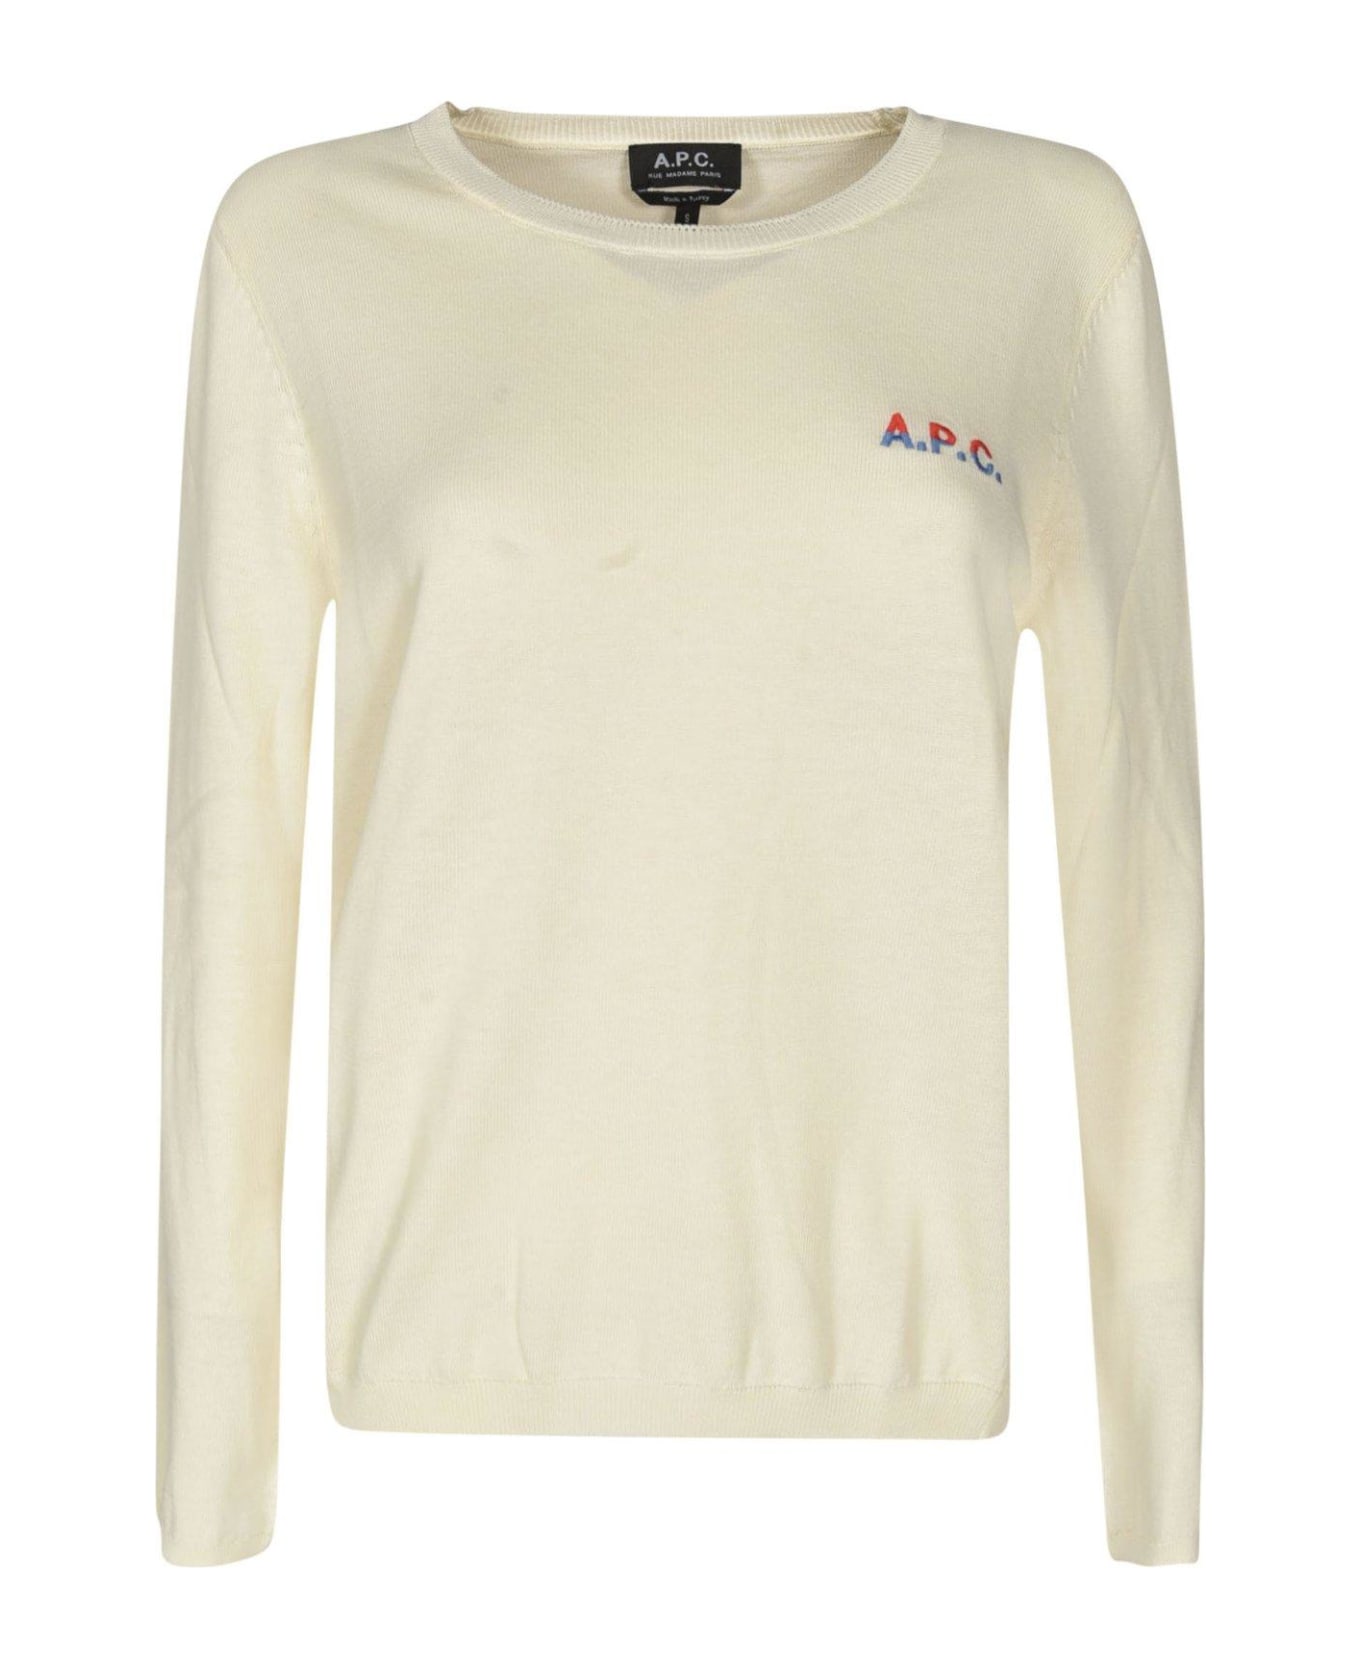 A.P.C. Logo Embroidered Knit Jumper